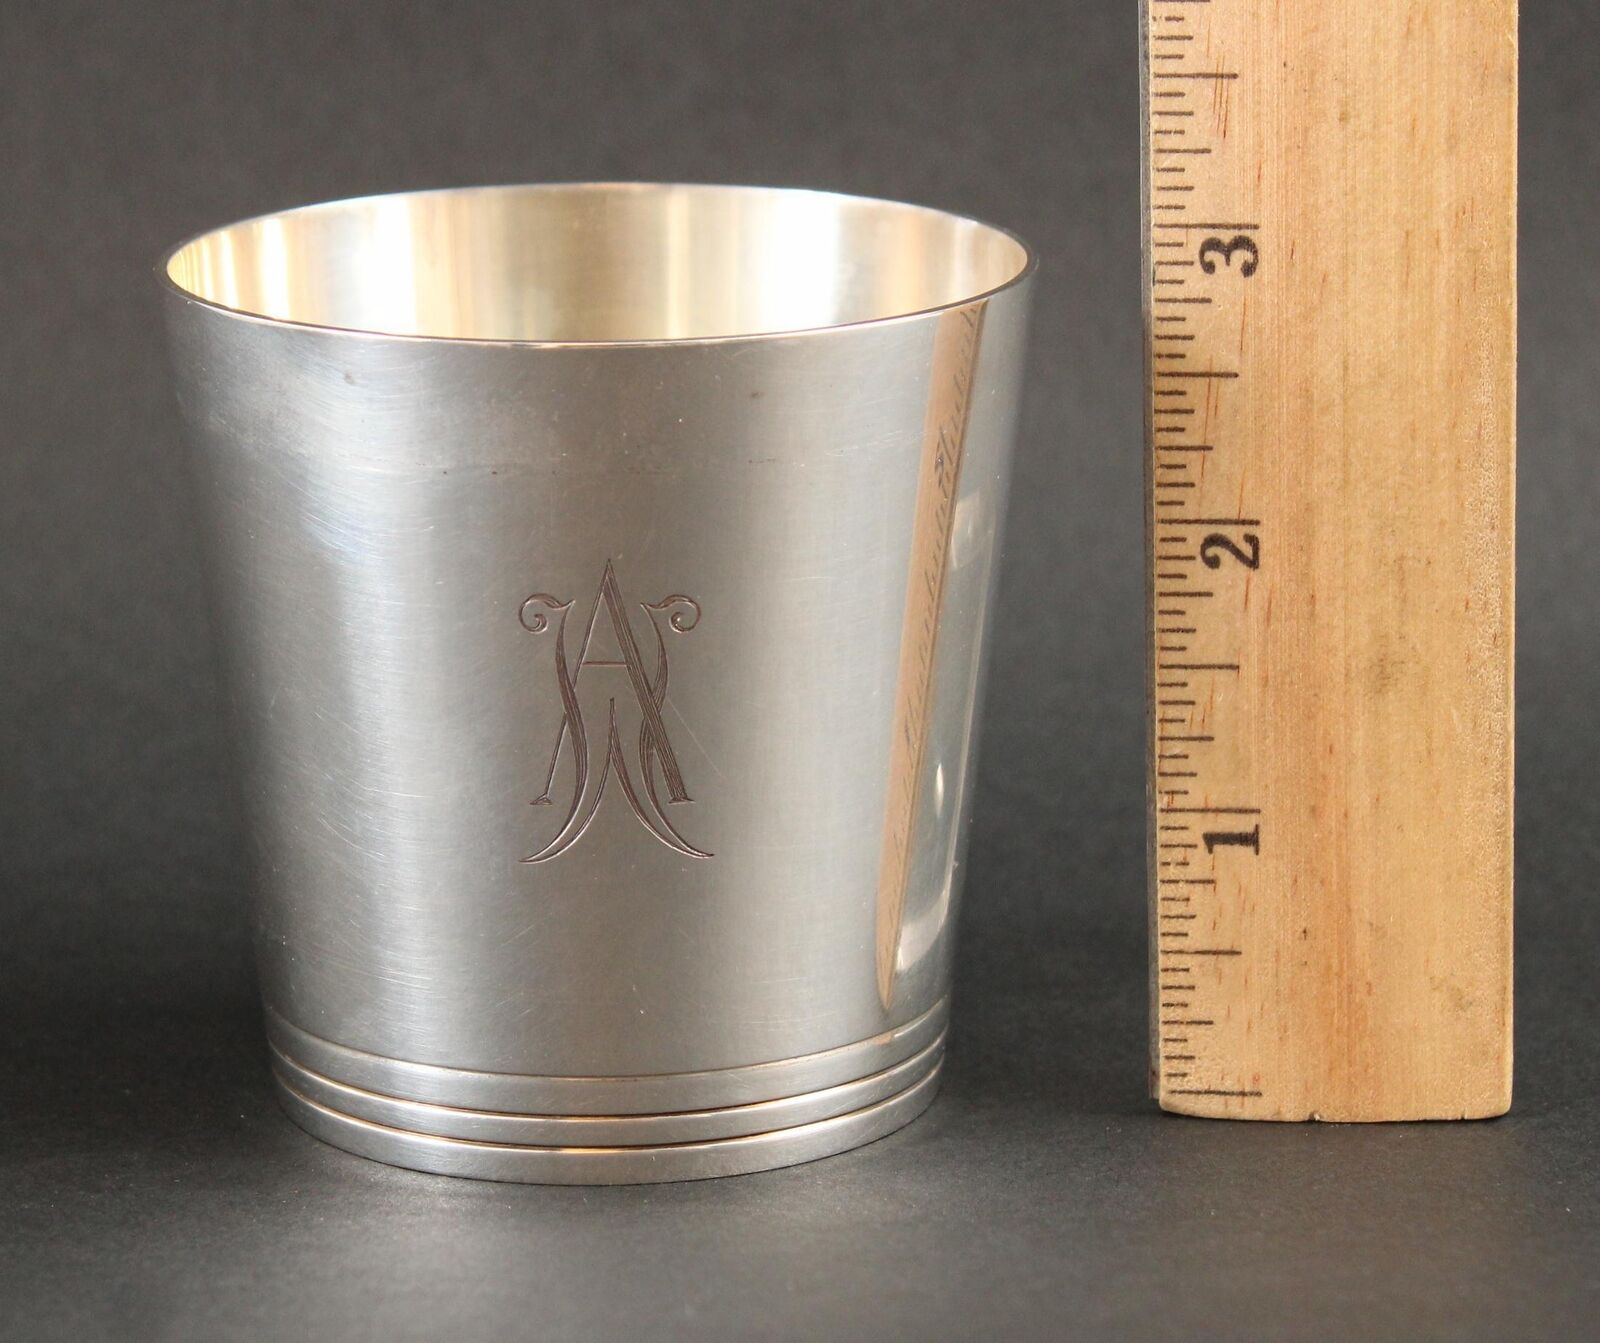 Antique Tiffany M-mark Sterling Silver Mint Julip Cup, William Astor Attribution